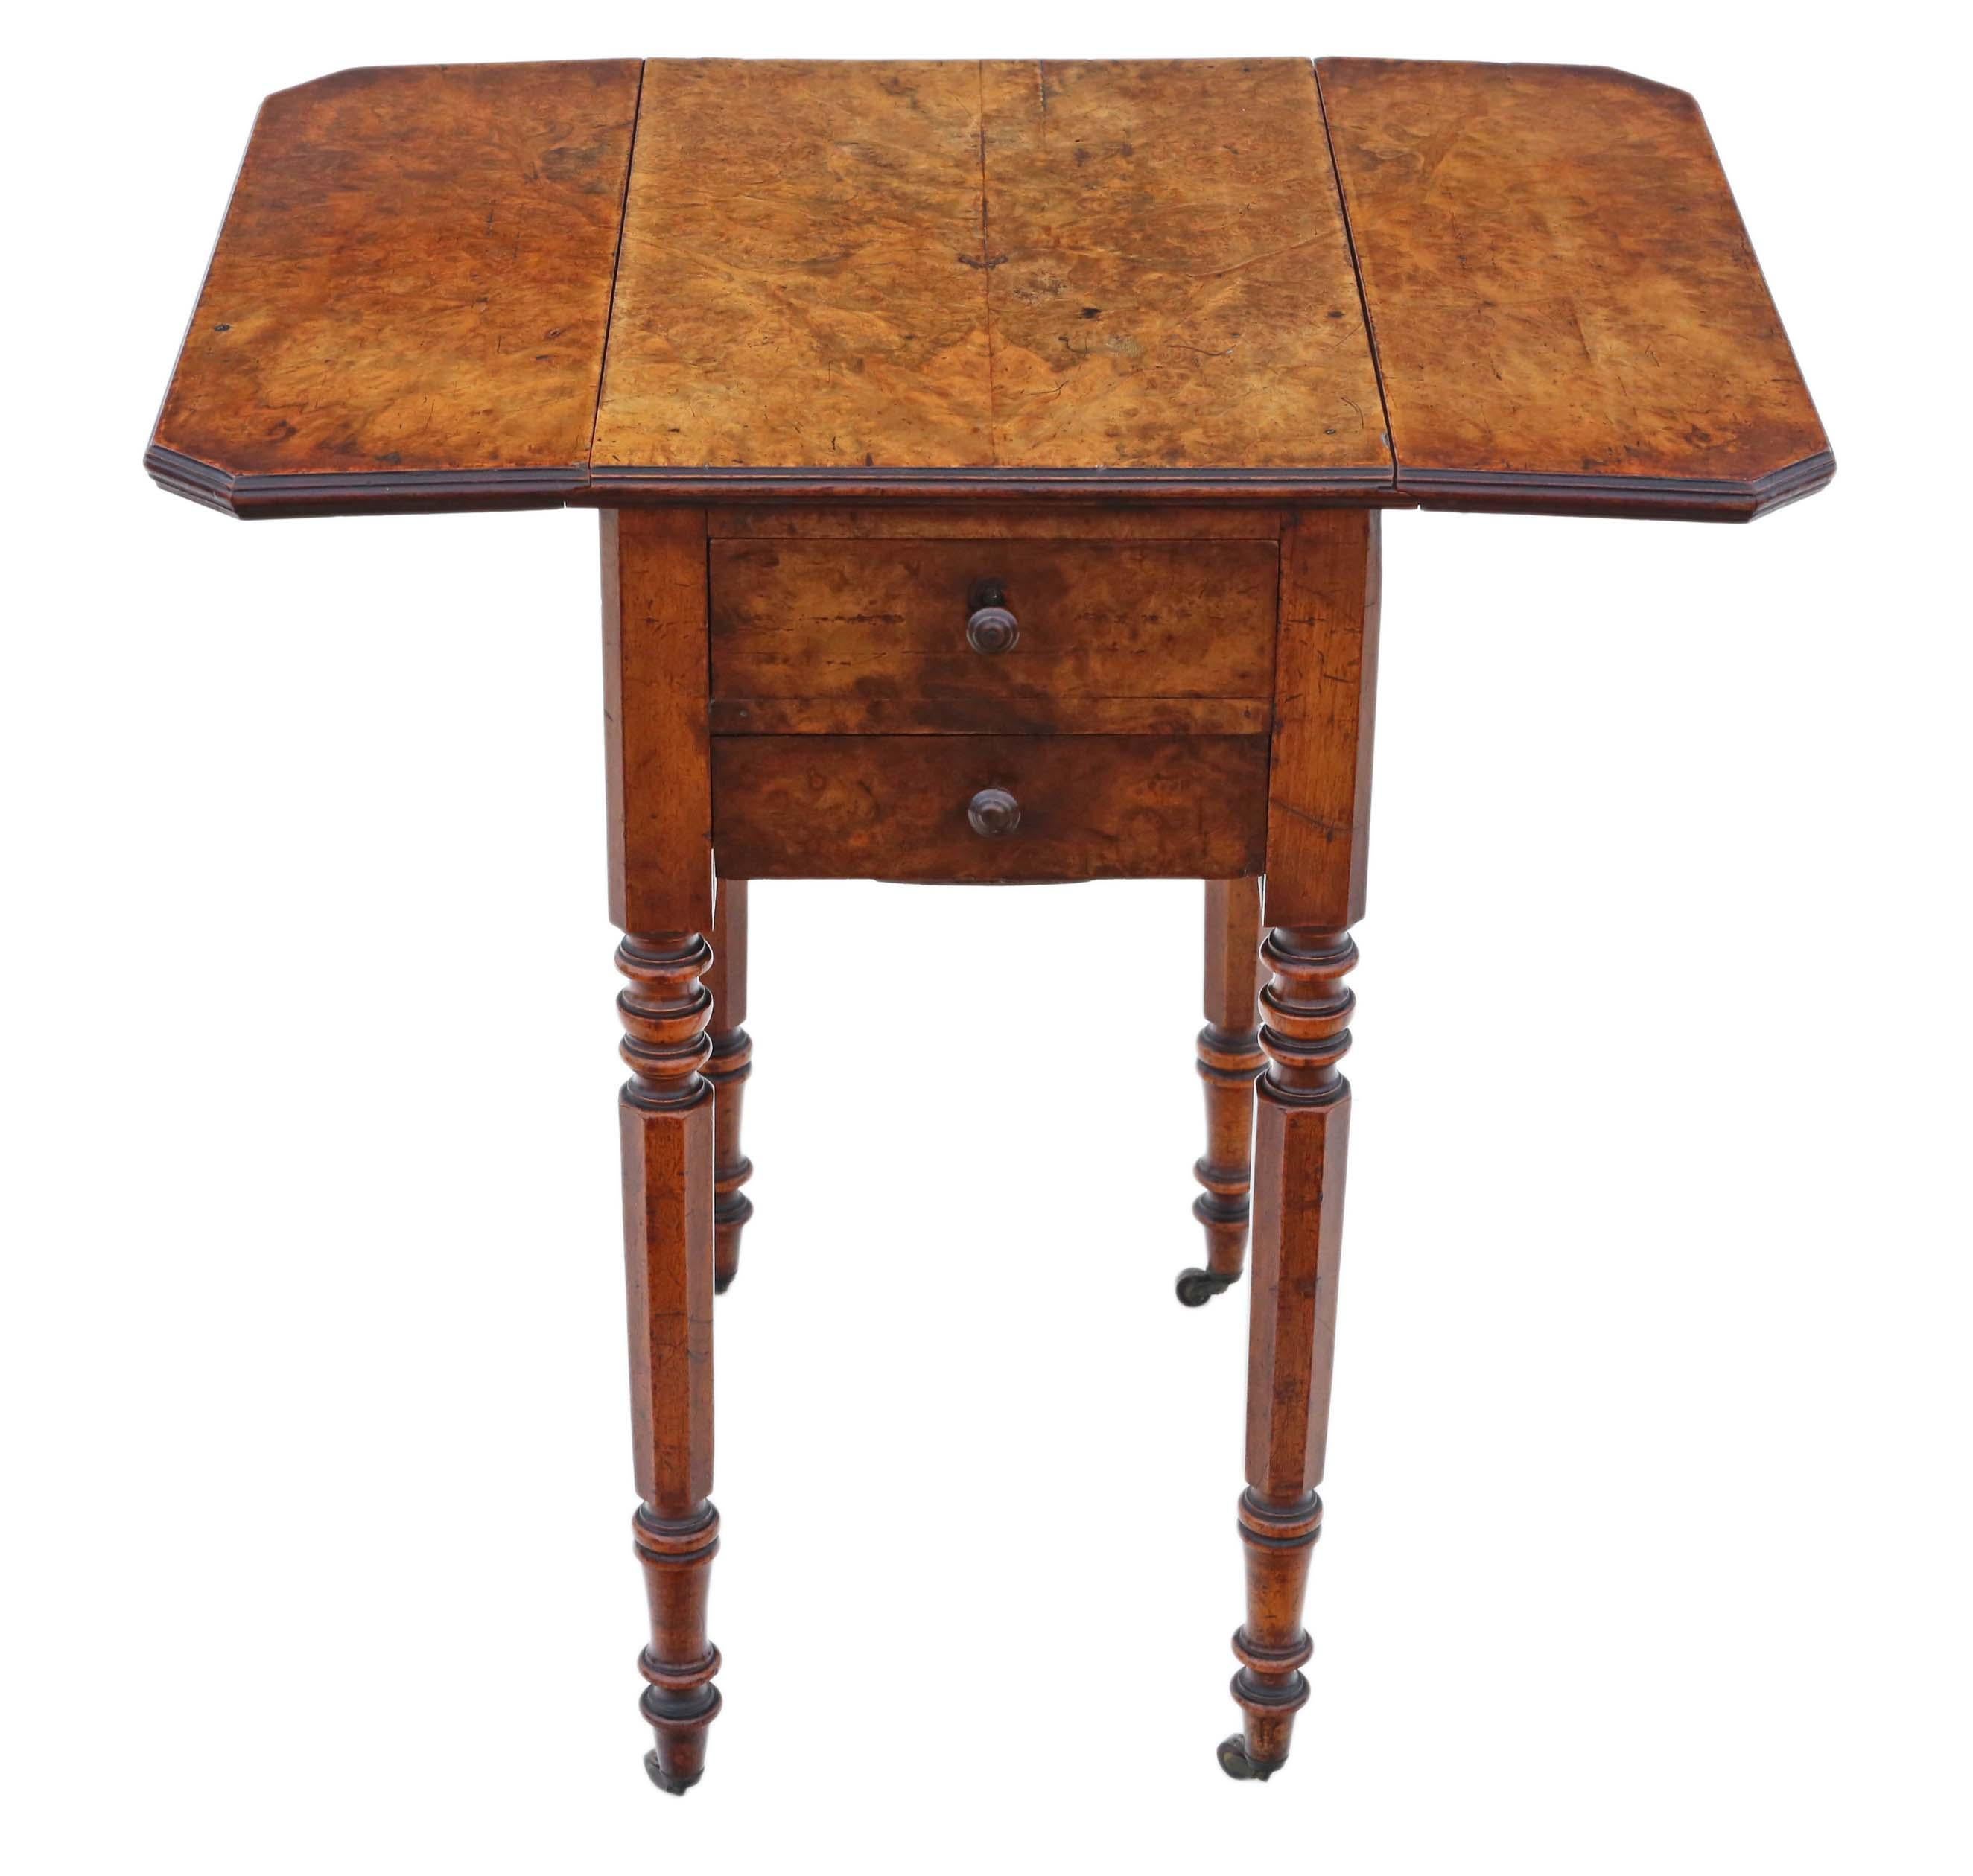 Antique Victorian 19th Century Burr Walnut Drop Leaf Work Table In Good Condition For Sale In Wisbech, Cambridgeshire